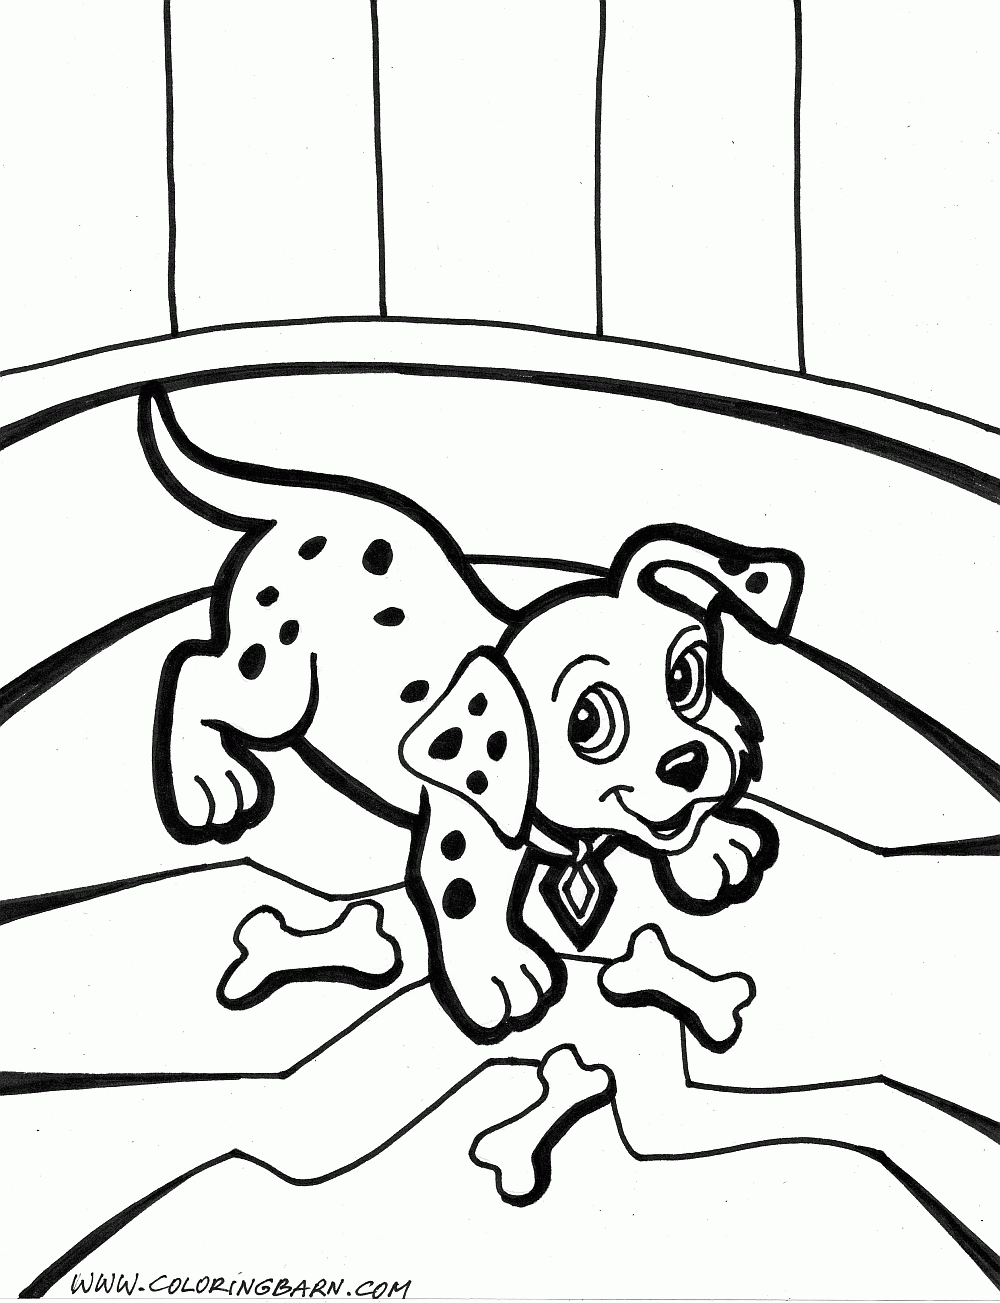 Cute Puppy Coloring Pages / Free Printable Puppies Coloring Pages For